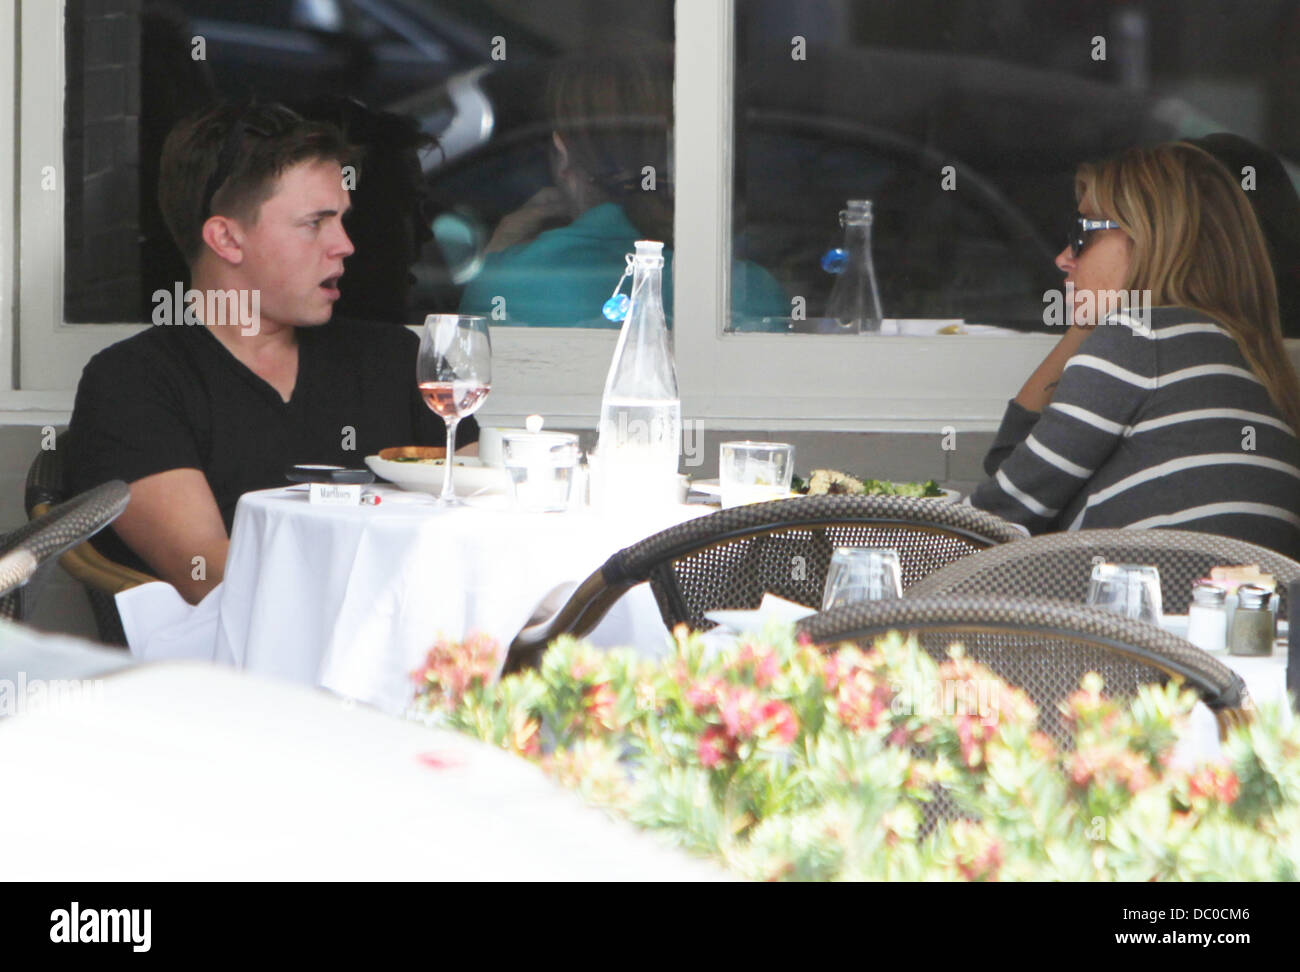 Jesse McCartney seen having lunch with his girlfriend Eden Sassoon at Porta Via in Beverly Hills Los Angeles, California - 26.09.11 Stock Photo